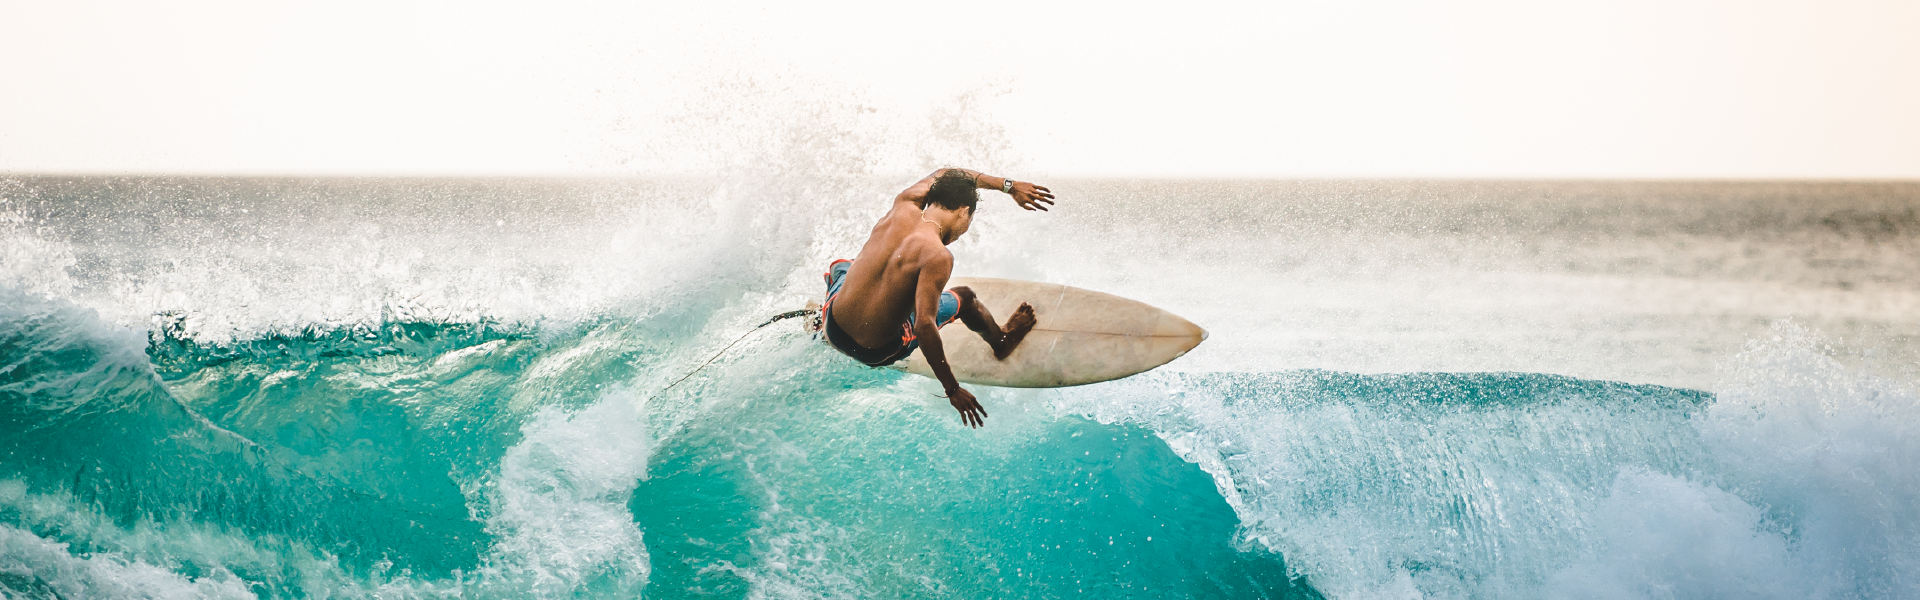 looking for new fun activities in Egypt? Surfing might be the hidden gem you’re searching for.